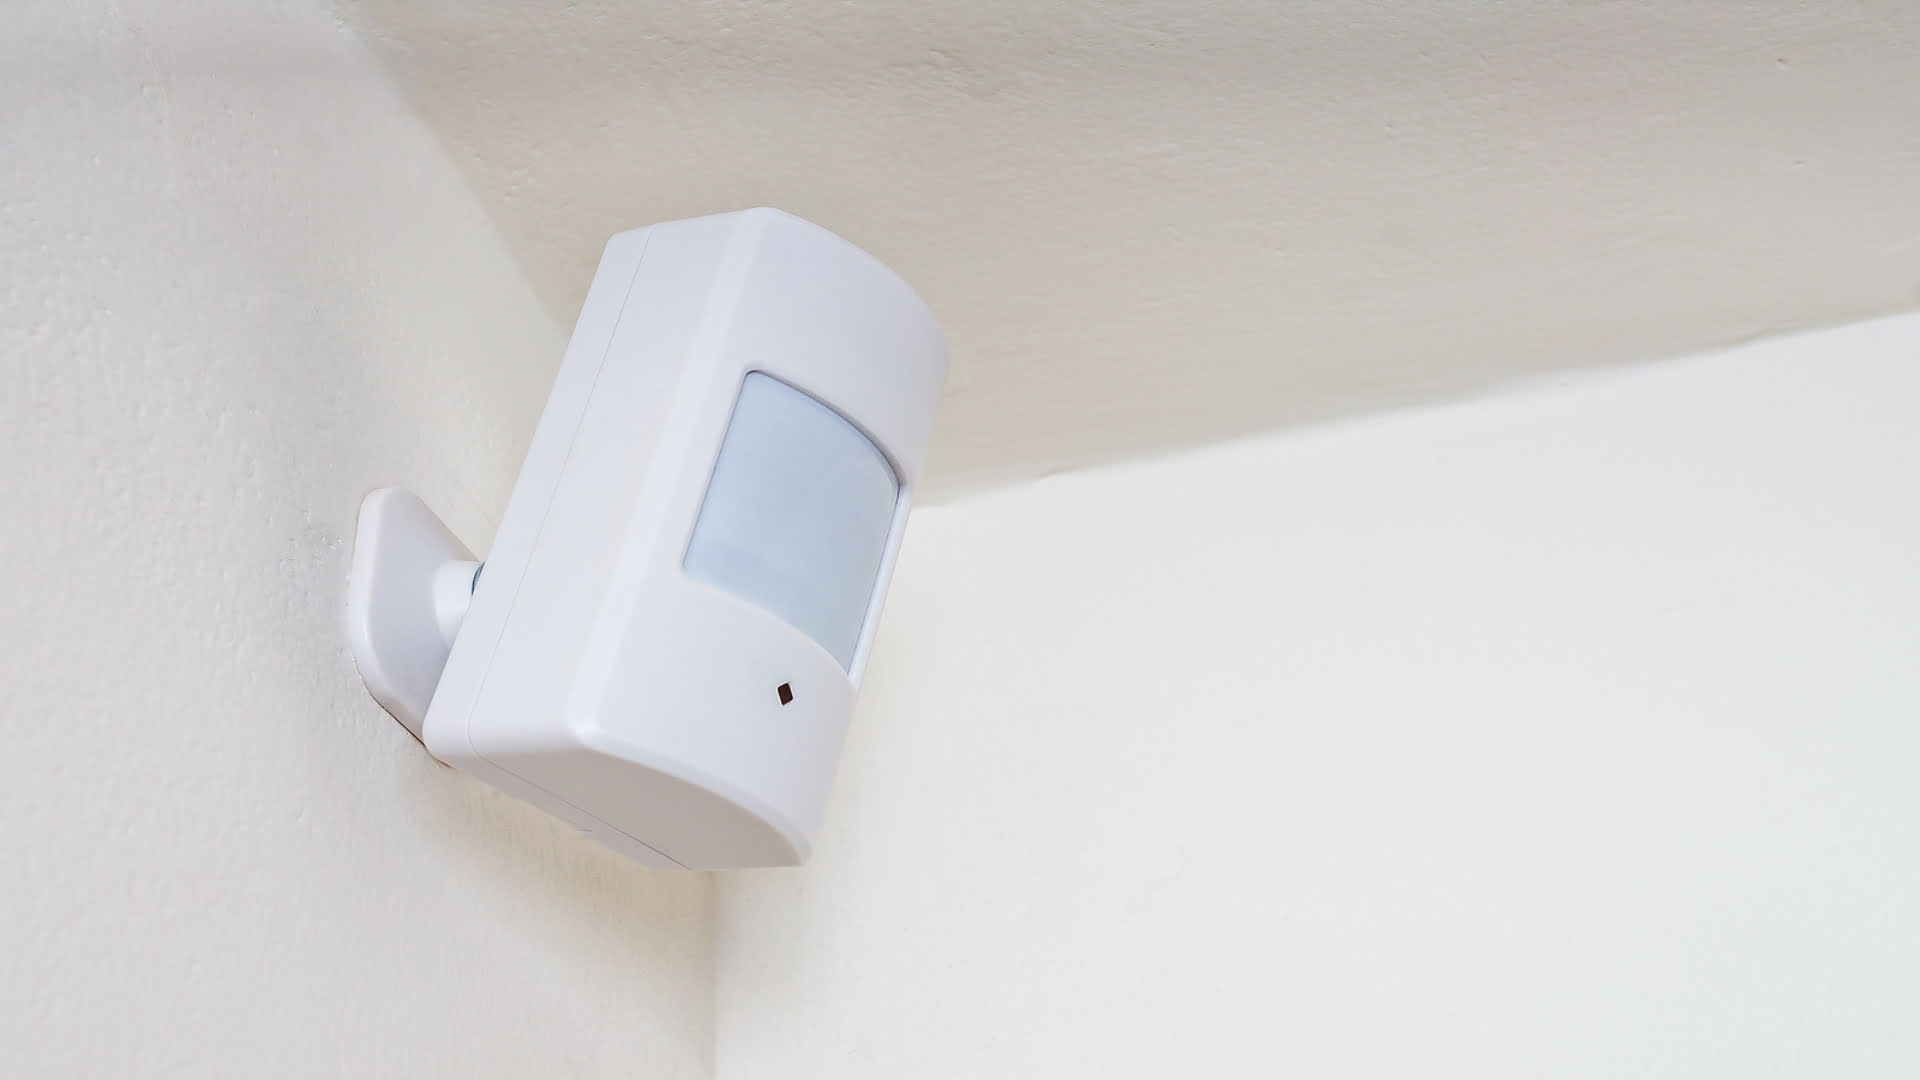 How To Remove An Intelligent Home Motion Detector